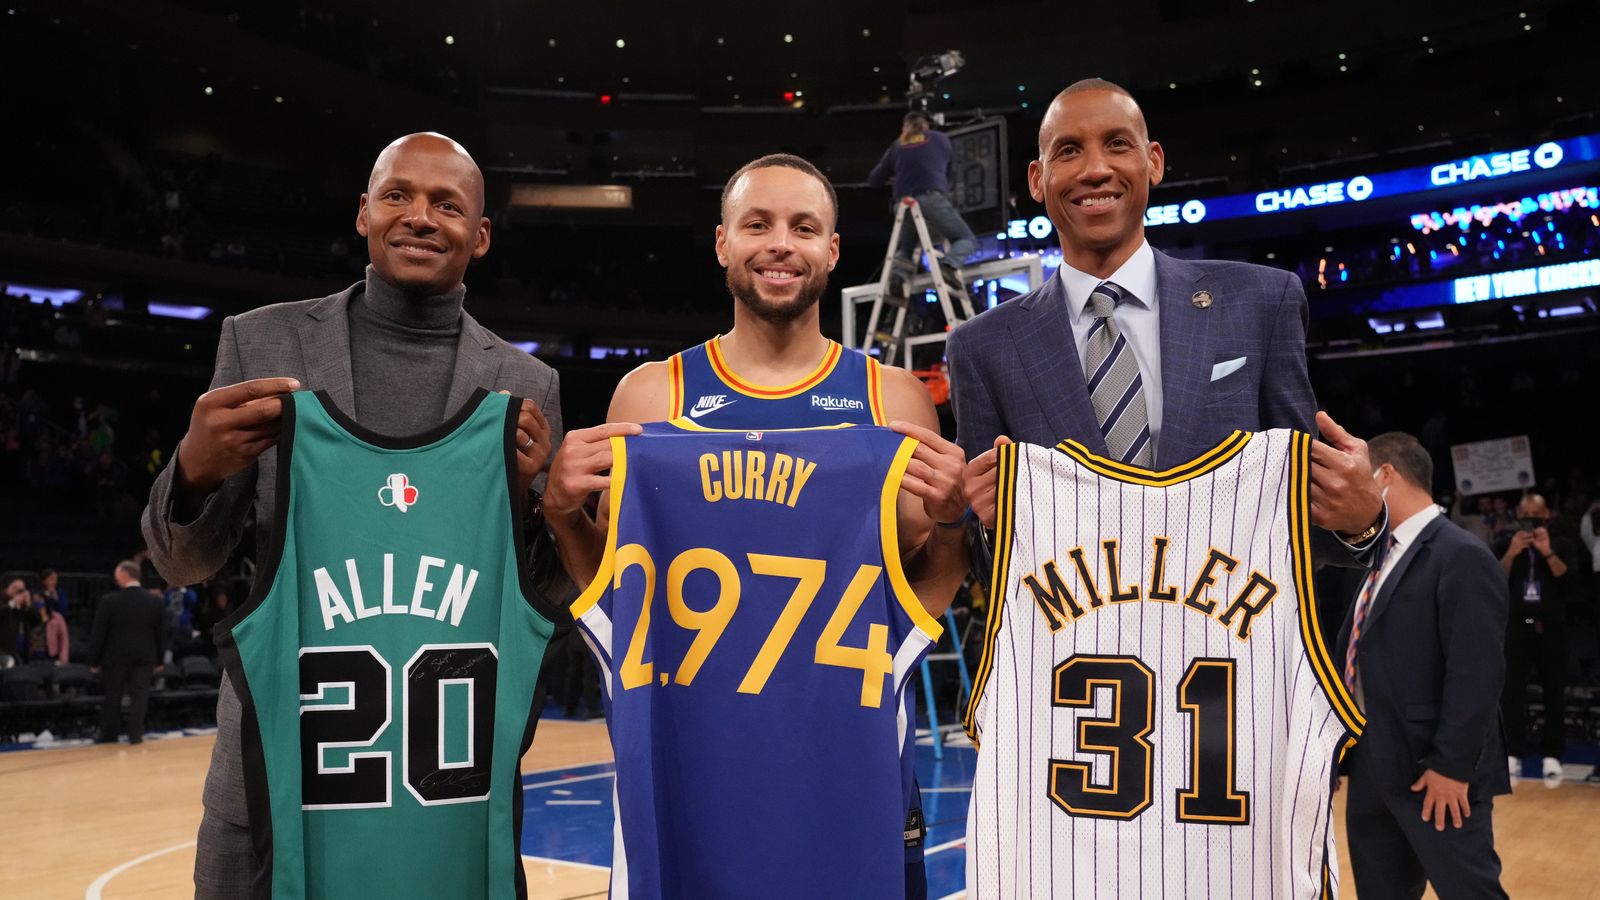 The 5 best NBA All-Star jerseys of all time